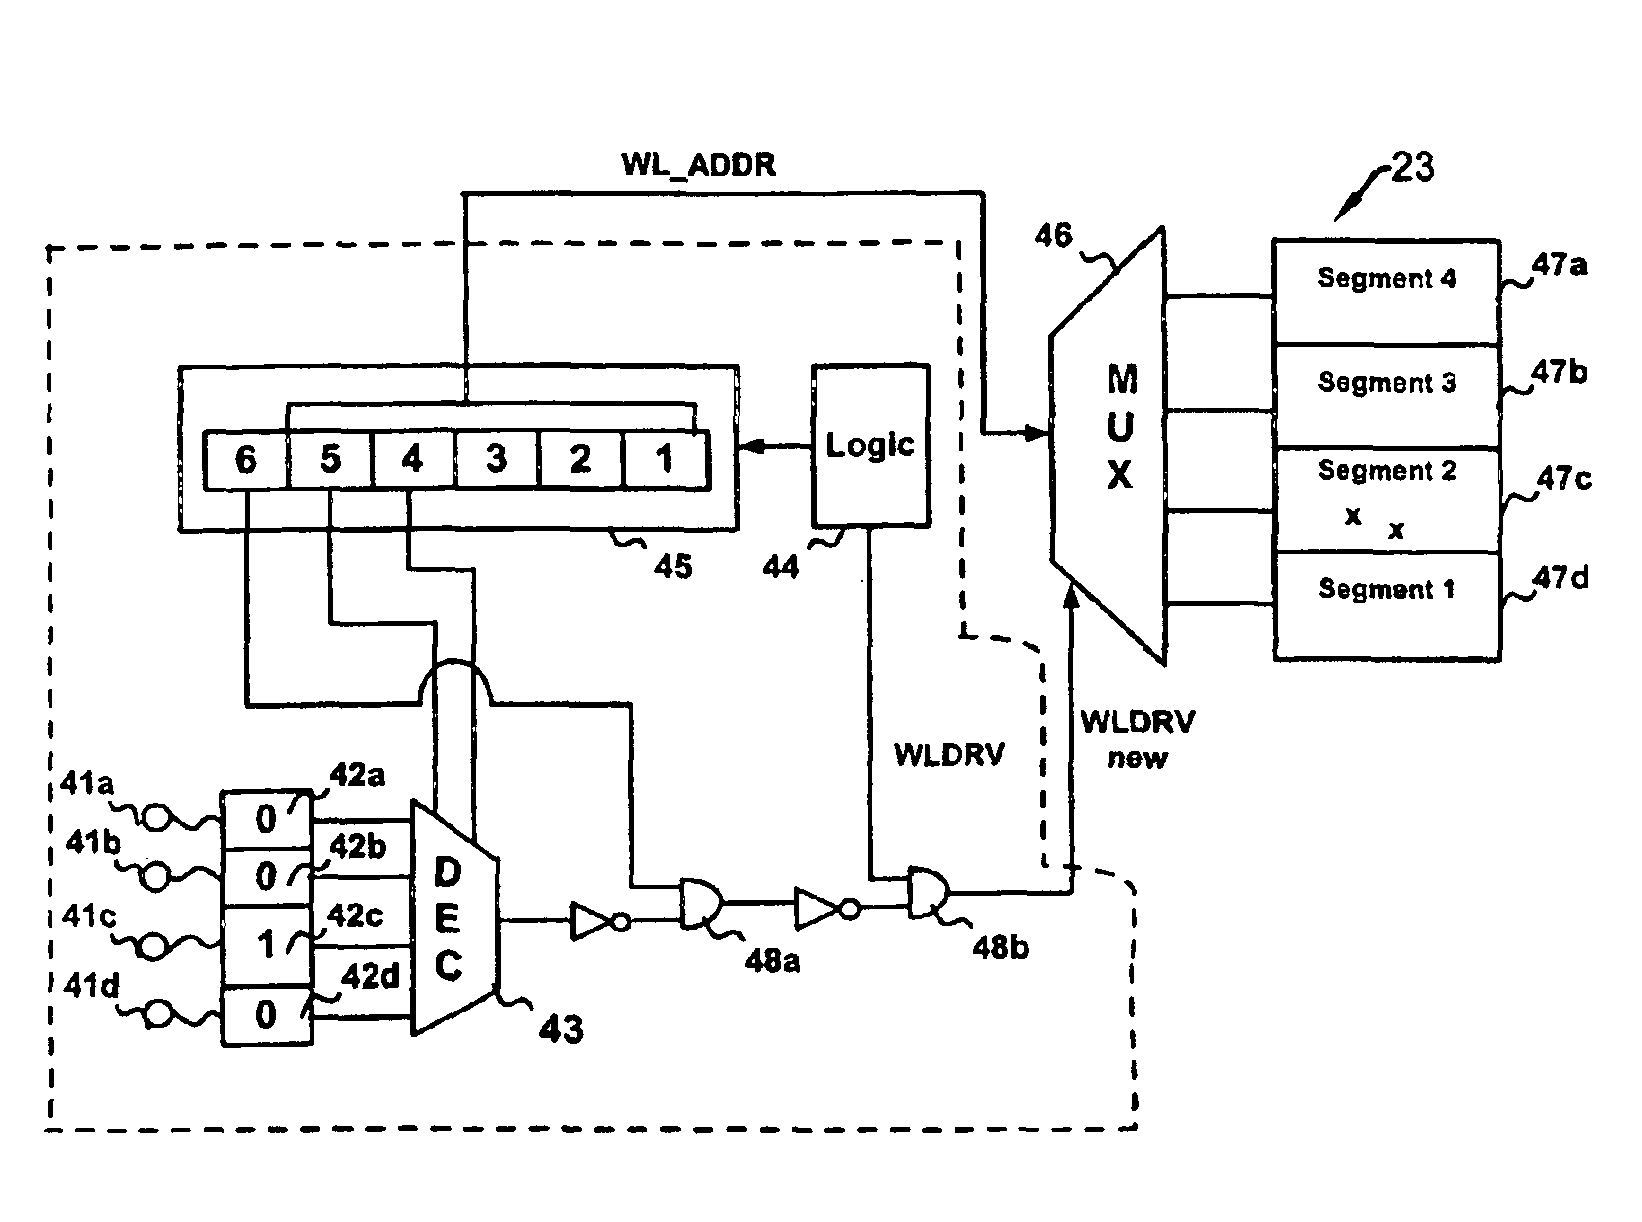 Method and system for manufacturing DRAMs with reduced self-refresh current requirements